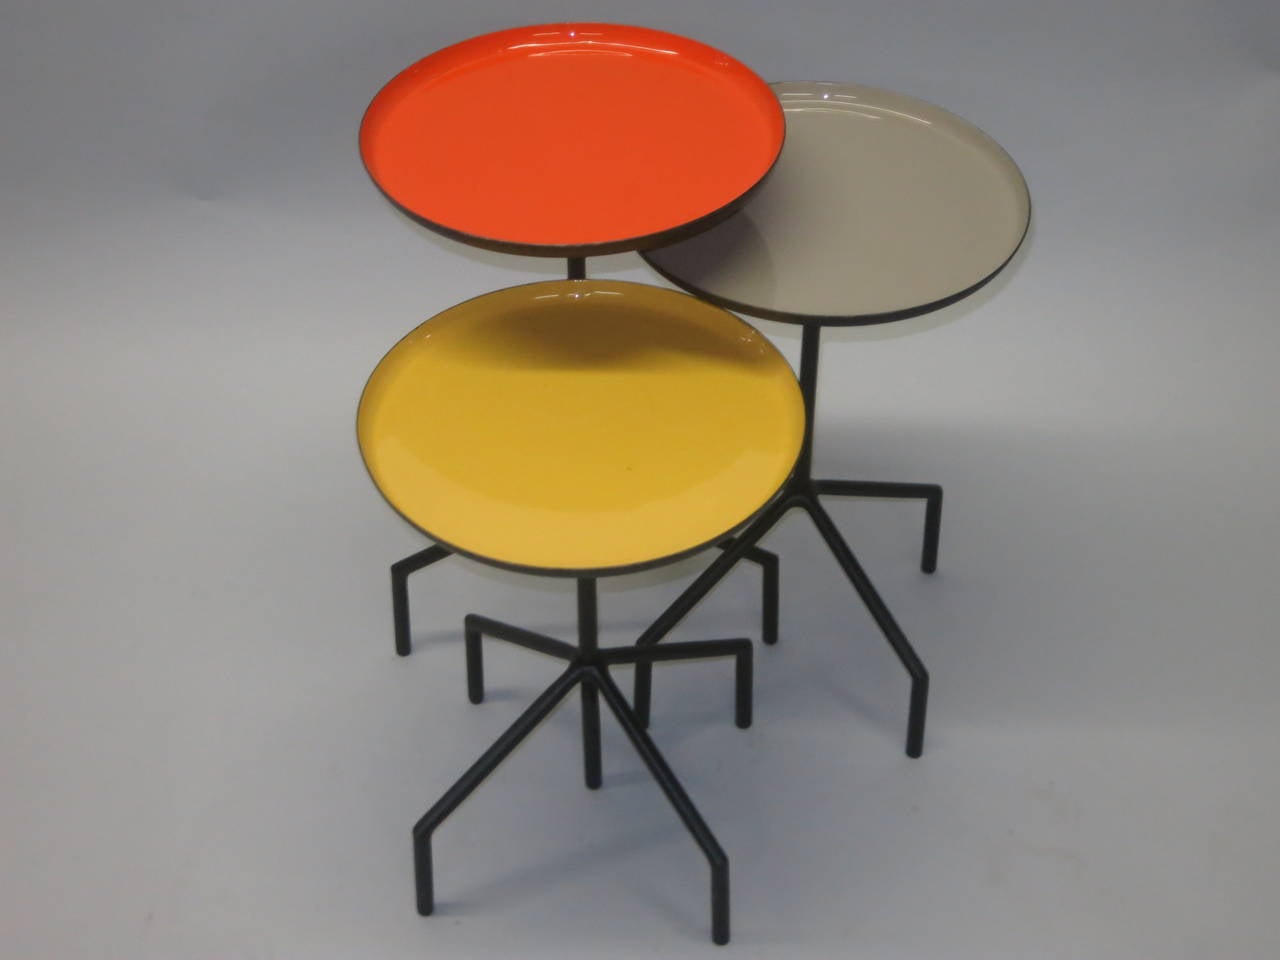 Set of three tables are composed of welded black steel rods with grey orange and yellow, round enameled, tops. The shortest is 16.5 inches high and yellow. The middle is 18.75 inches tall with a grey top. The tallest is 21inches with an orange top.